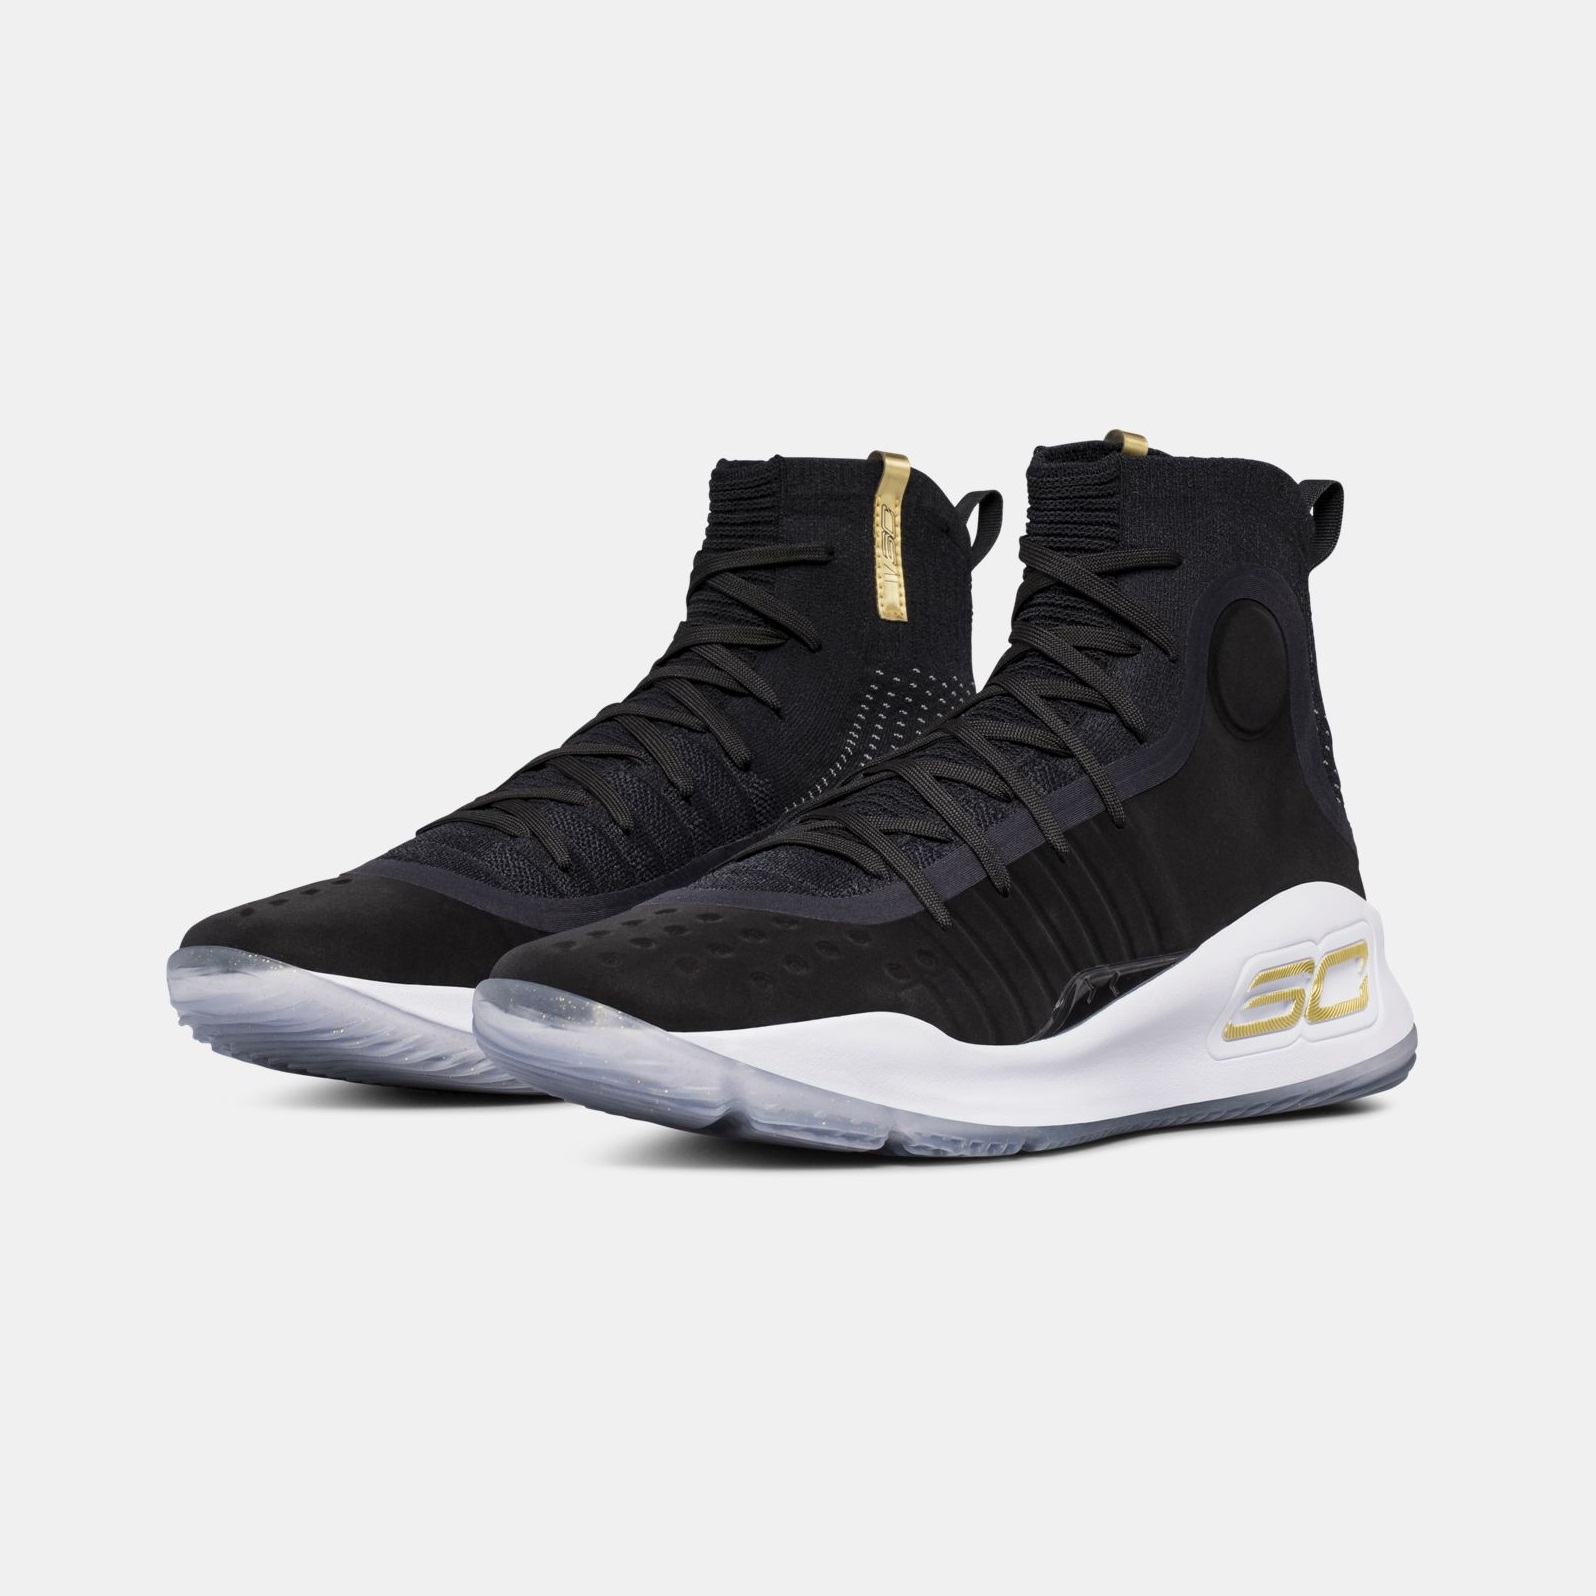 Curry 4 Under Armour 2023 – Get New Year 2023 Update